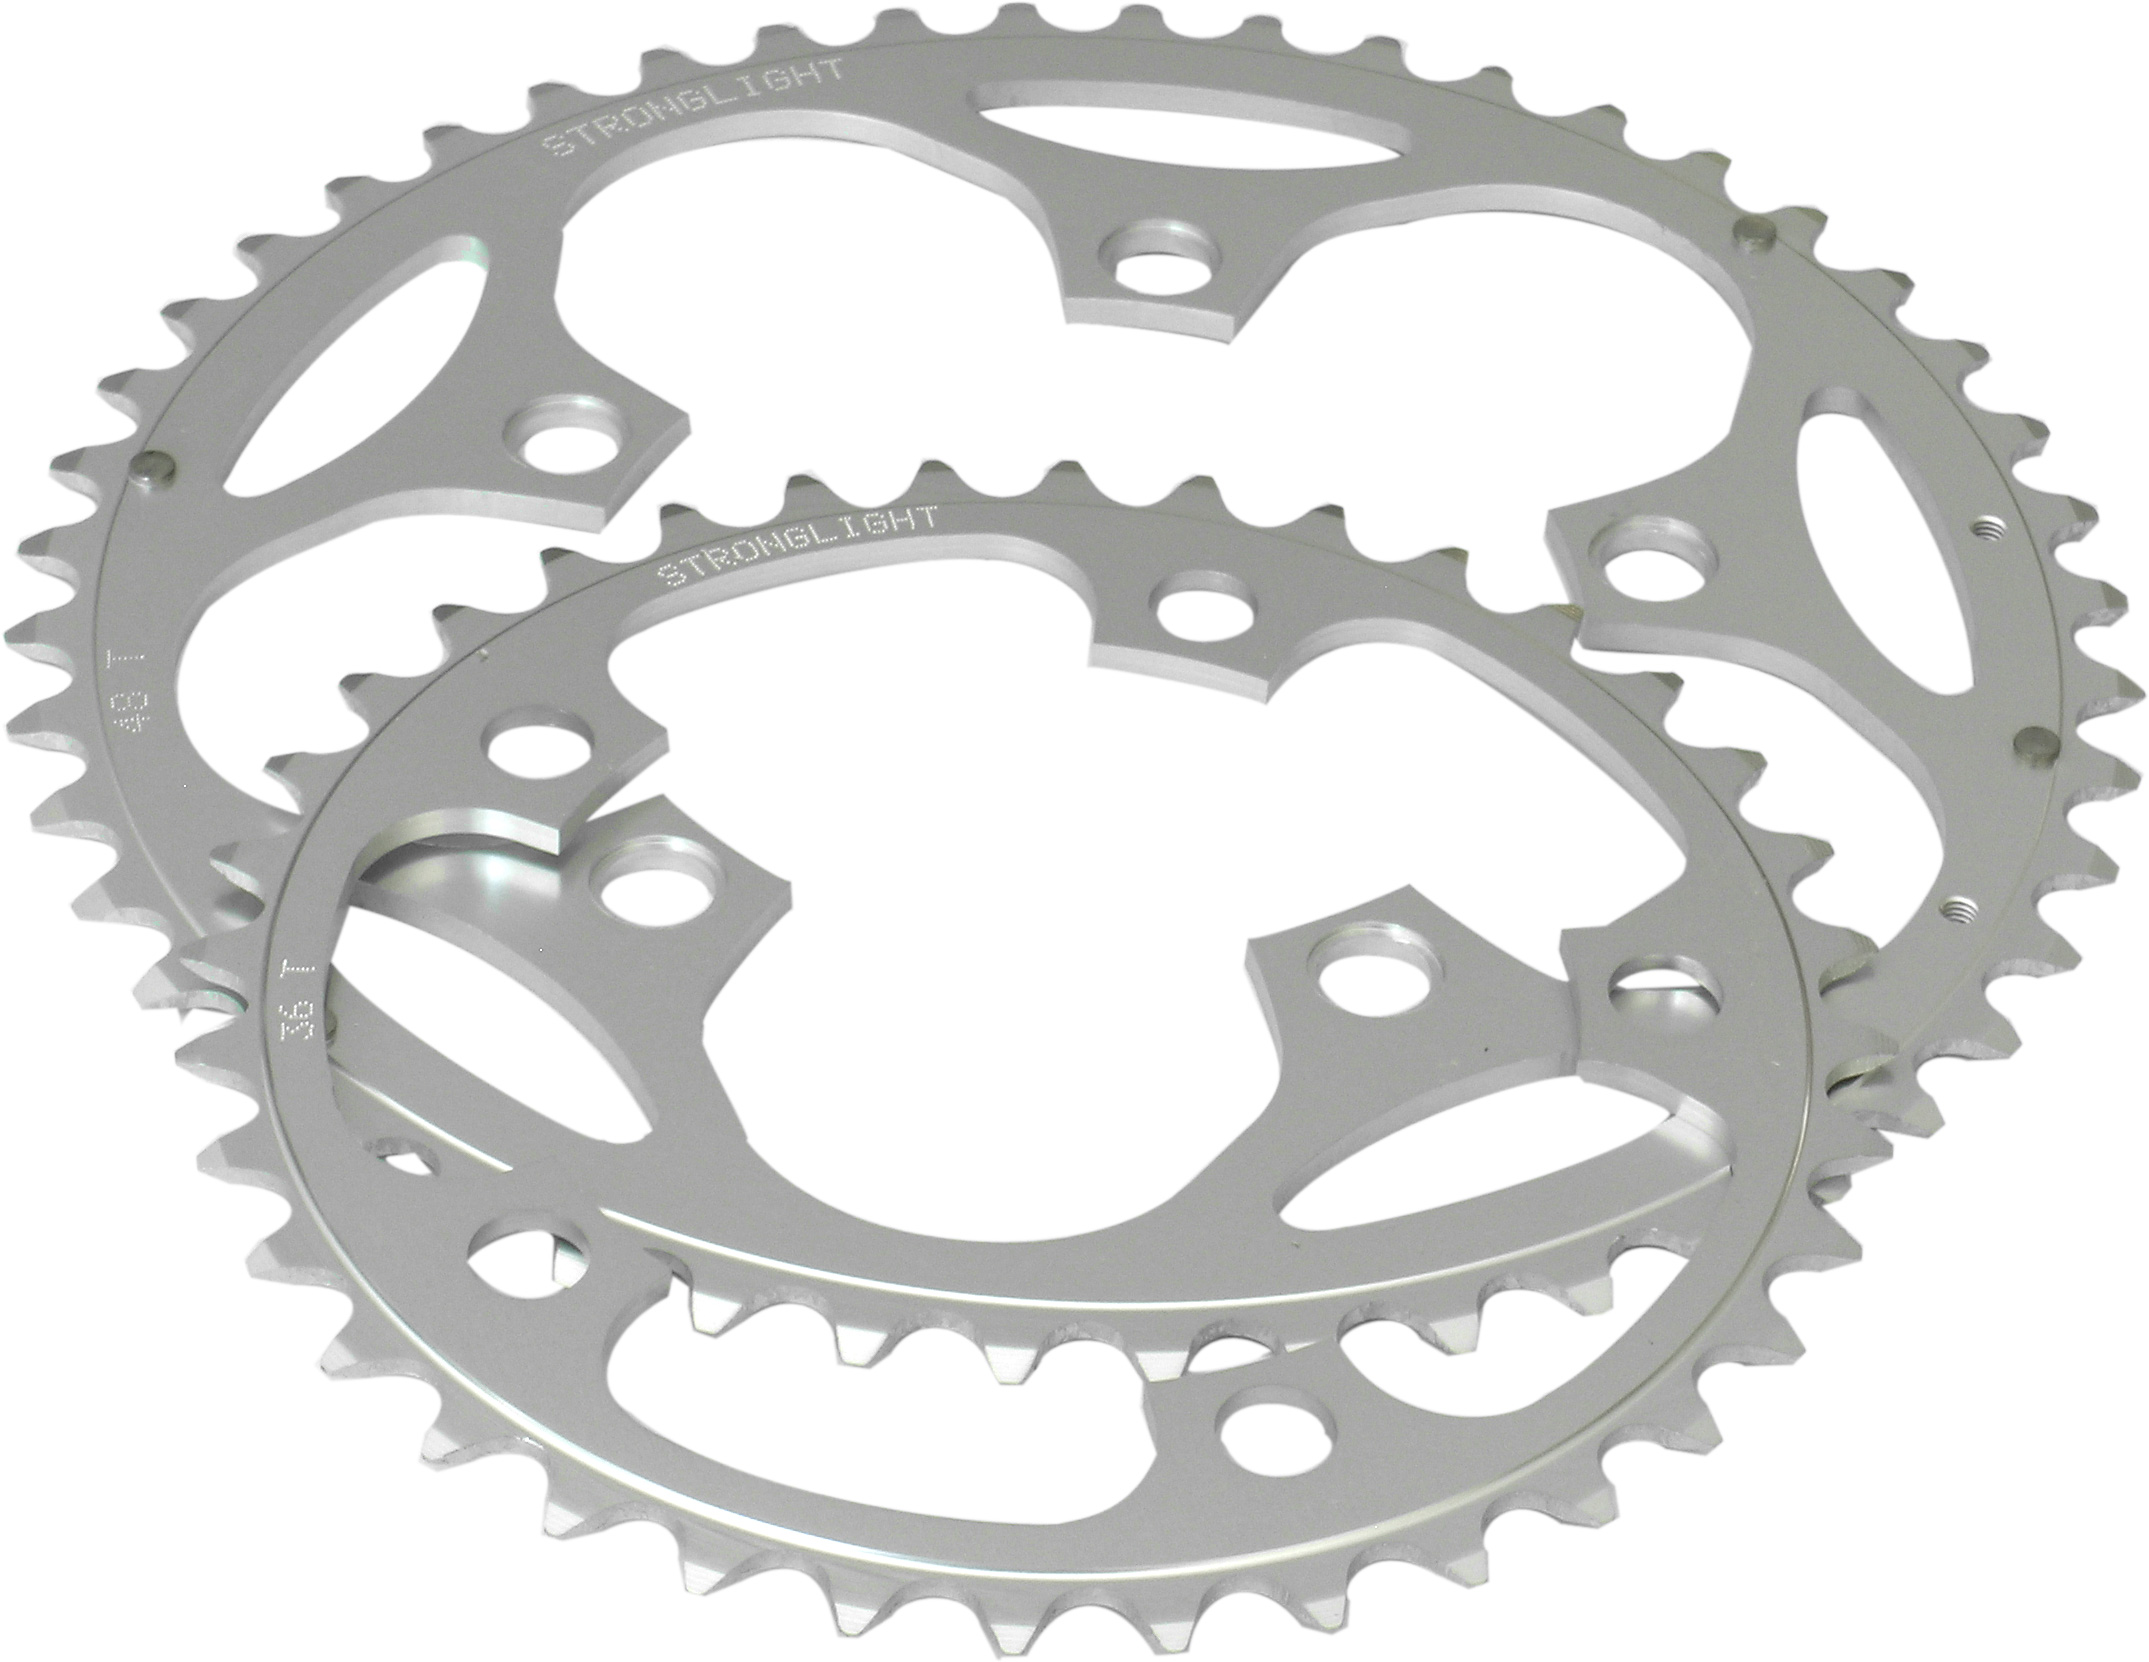 RD11044S Stronglight 44T Silver 5-Arm Alloy Chainring